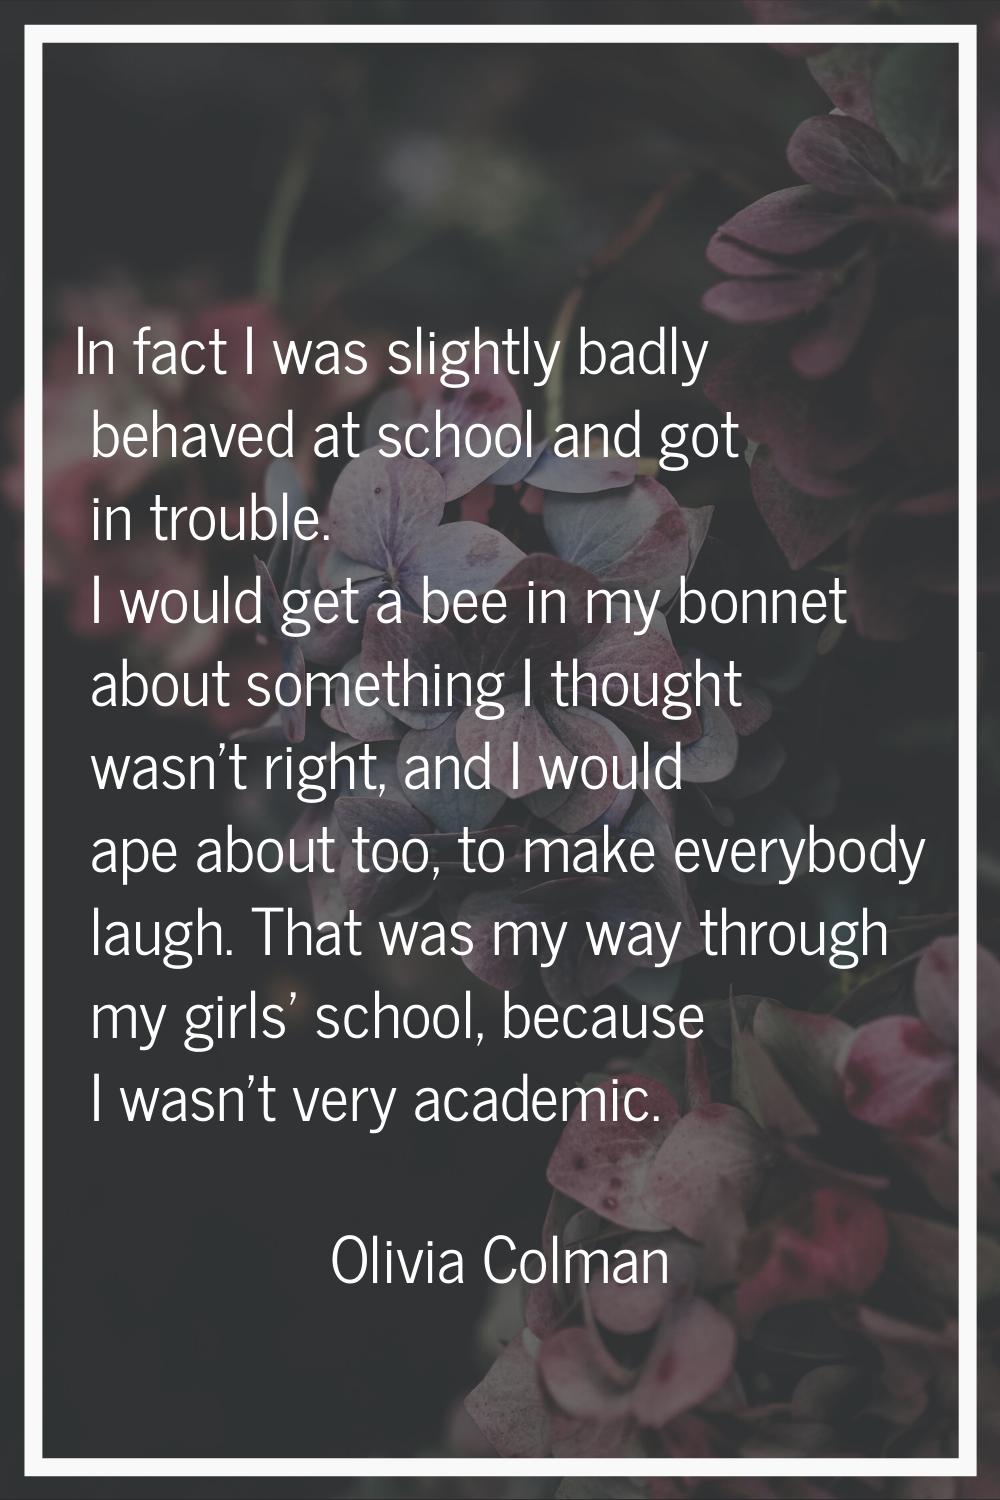 In fact I was slightly badly behaved at school and got in trouble. I would get a bee in my bonnet a